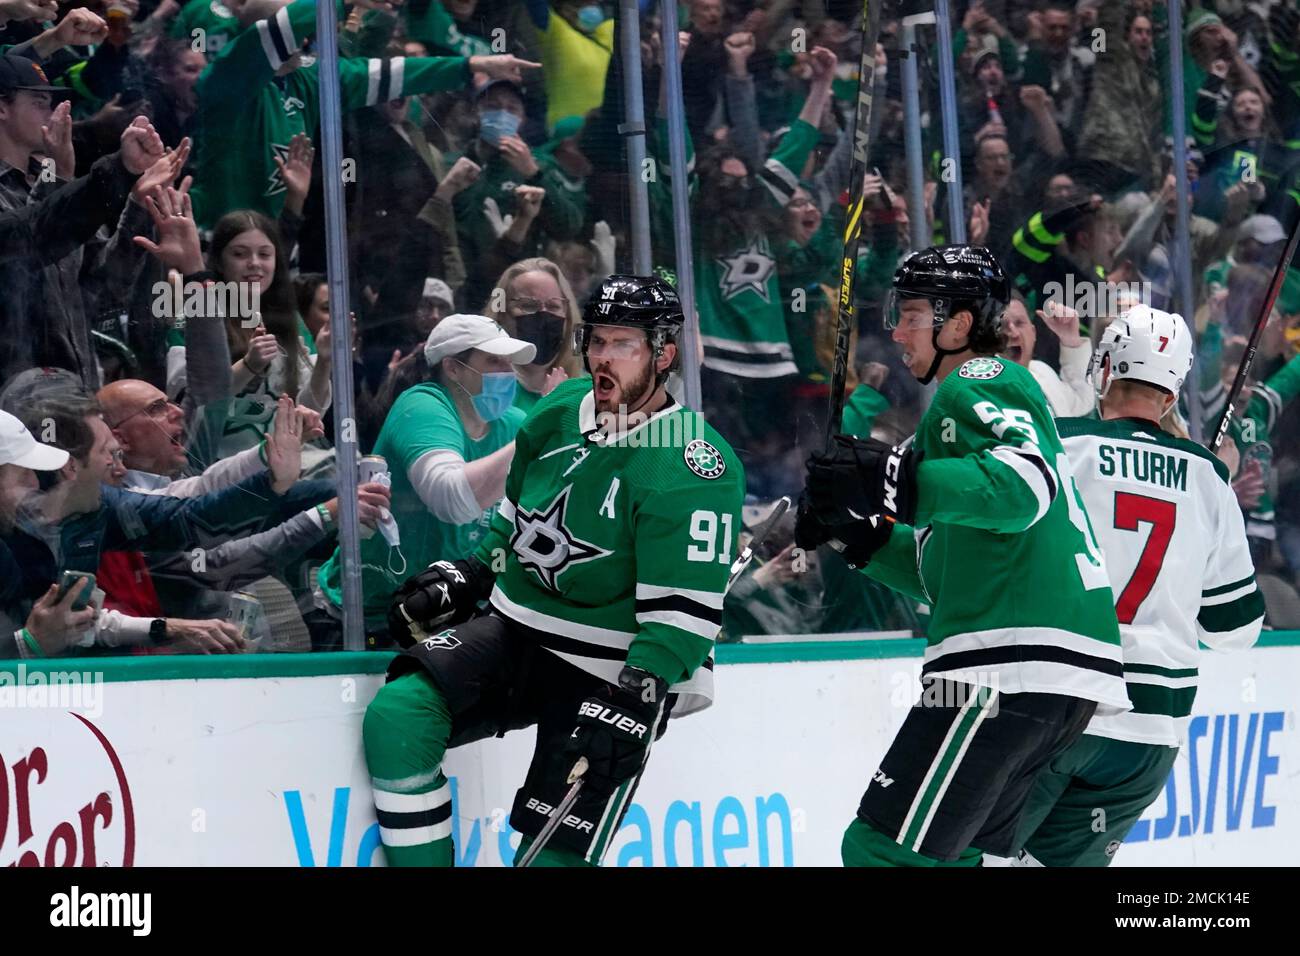 Fans cheer as Dallas Stars' Tyler Seguin (91) and Thomas (55) celebrate a goal scored by Seguin as Minnesota Wild center Nico Sturm (7) skates past in the first period of